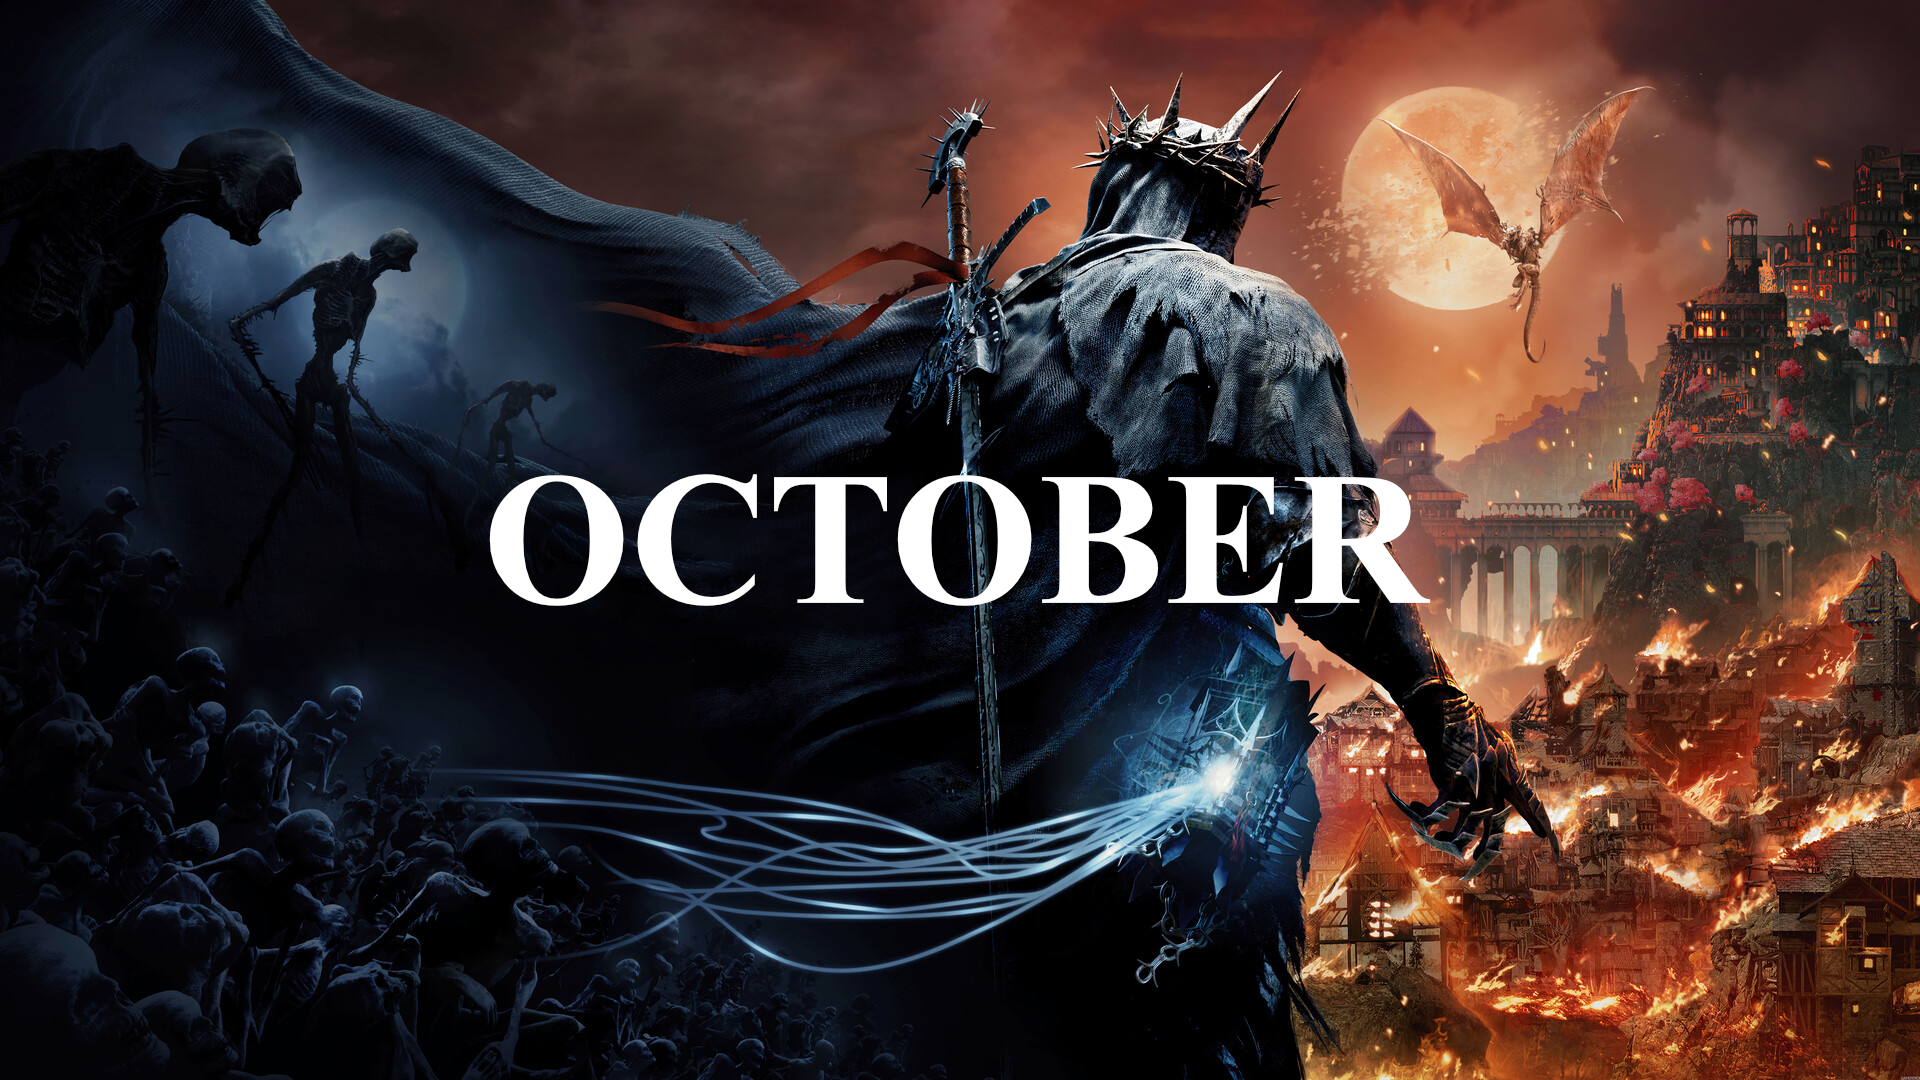 Lords of the Fallen launches in October